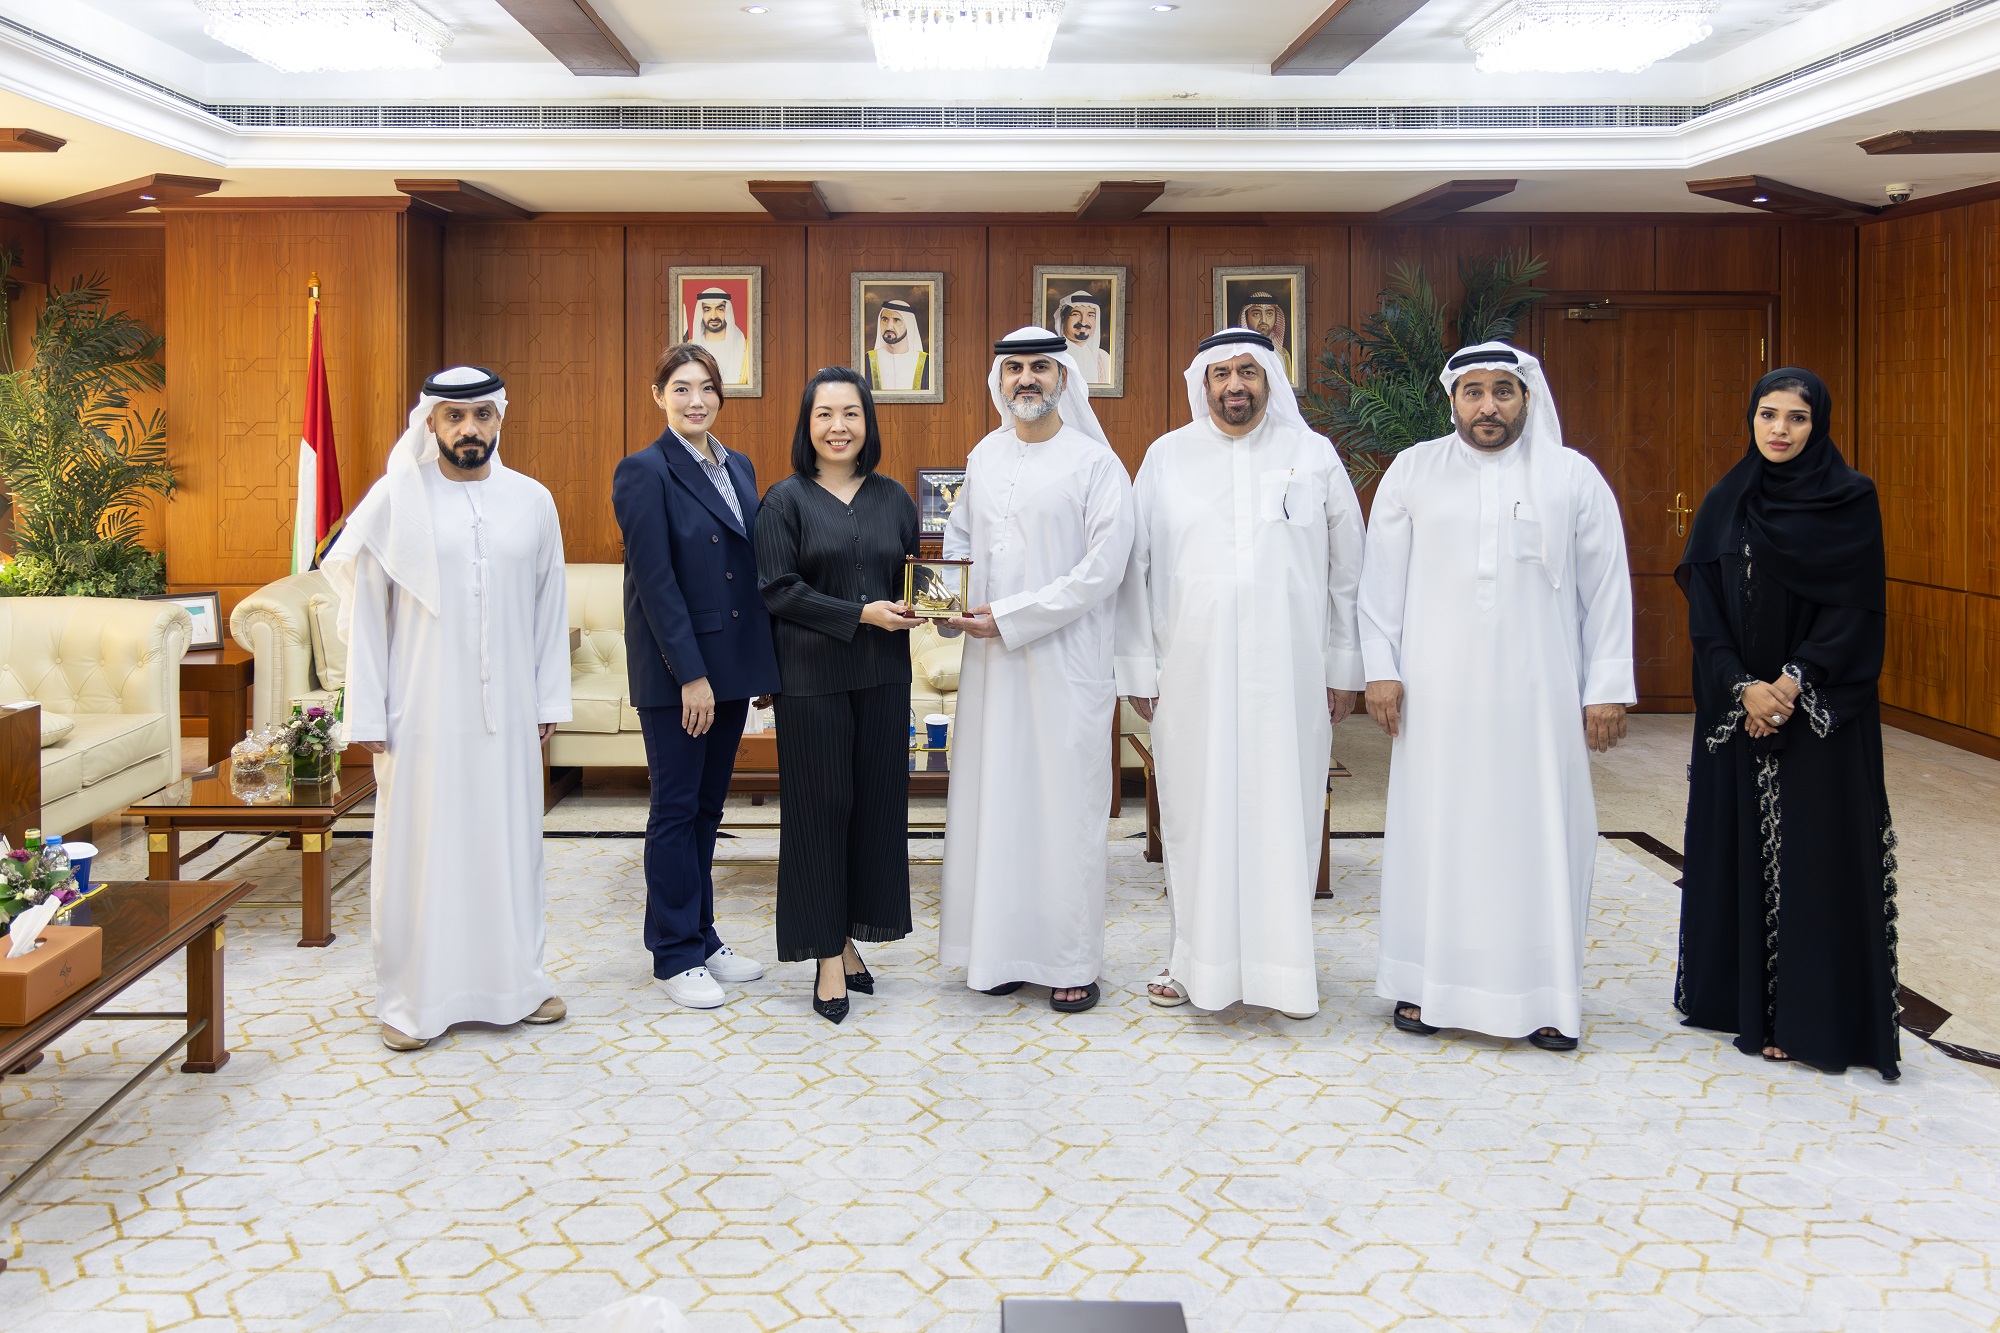 Ajman Chamber Discusses Growth Opportunities For Medical Tourism Investments In Ajman With A Thai Delegation